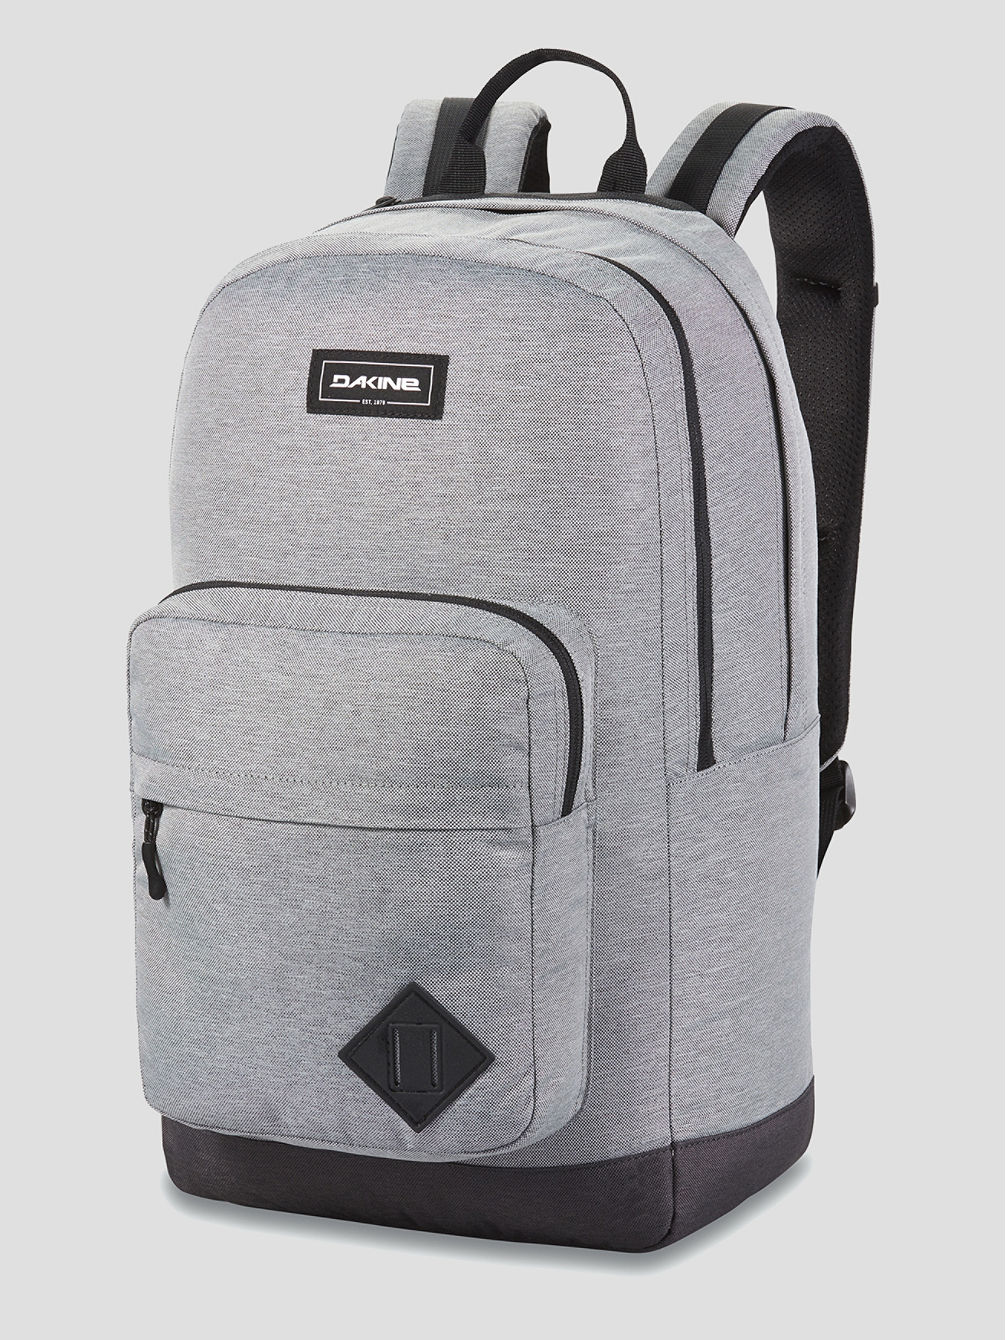 365 DLX 27L Backpack